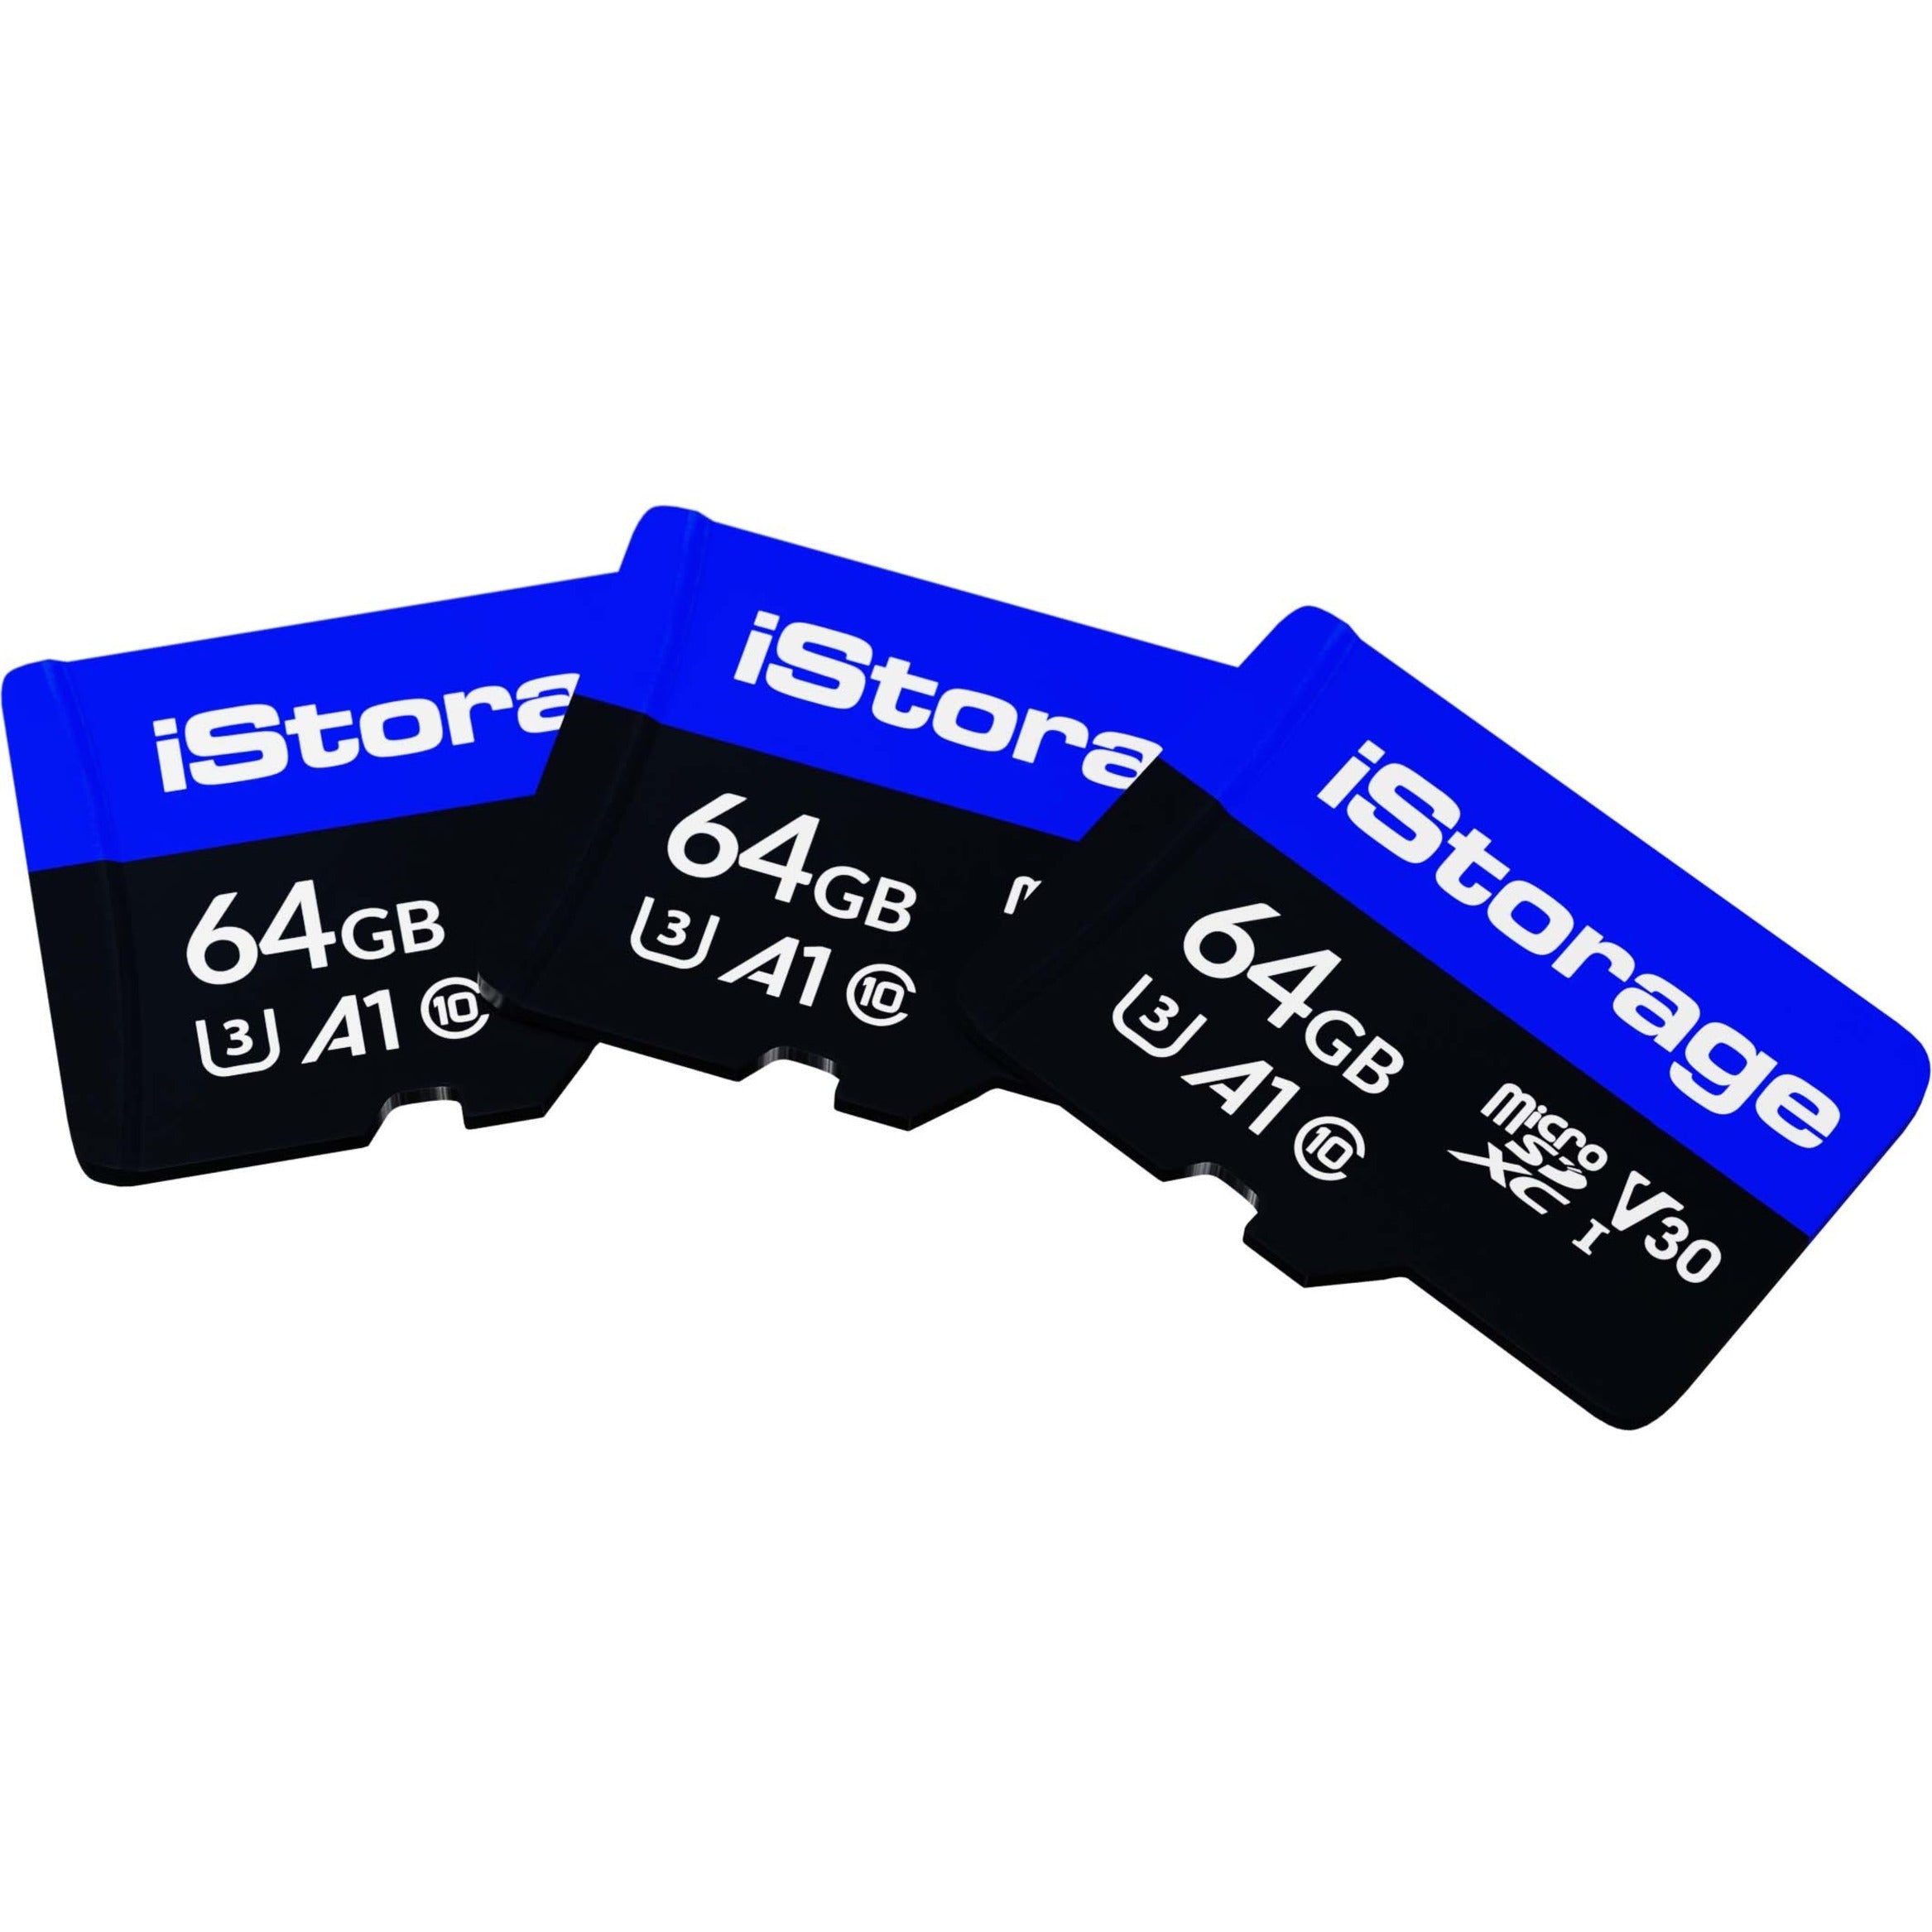 iStorage IS-MSD-3-64 64GB MicroSDXC Card, Pack of 3, High-Speed Storage Solution